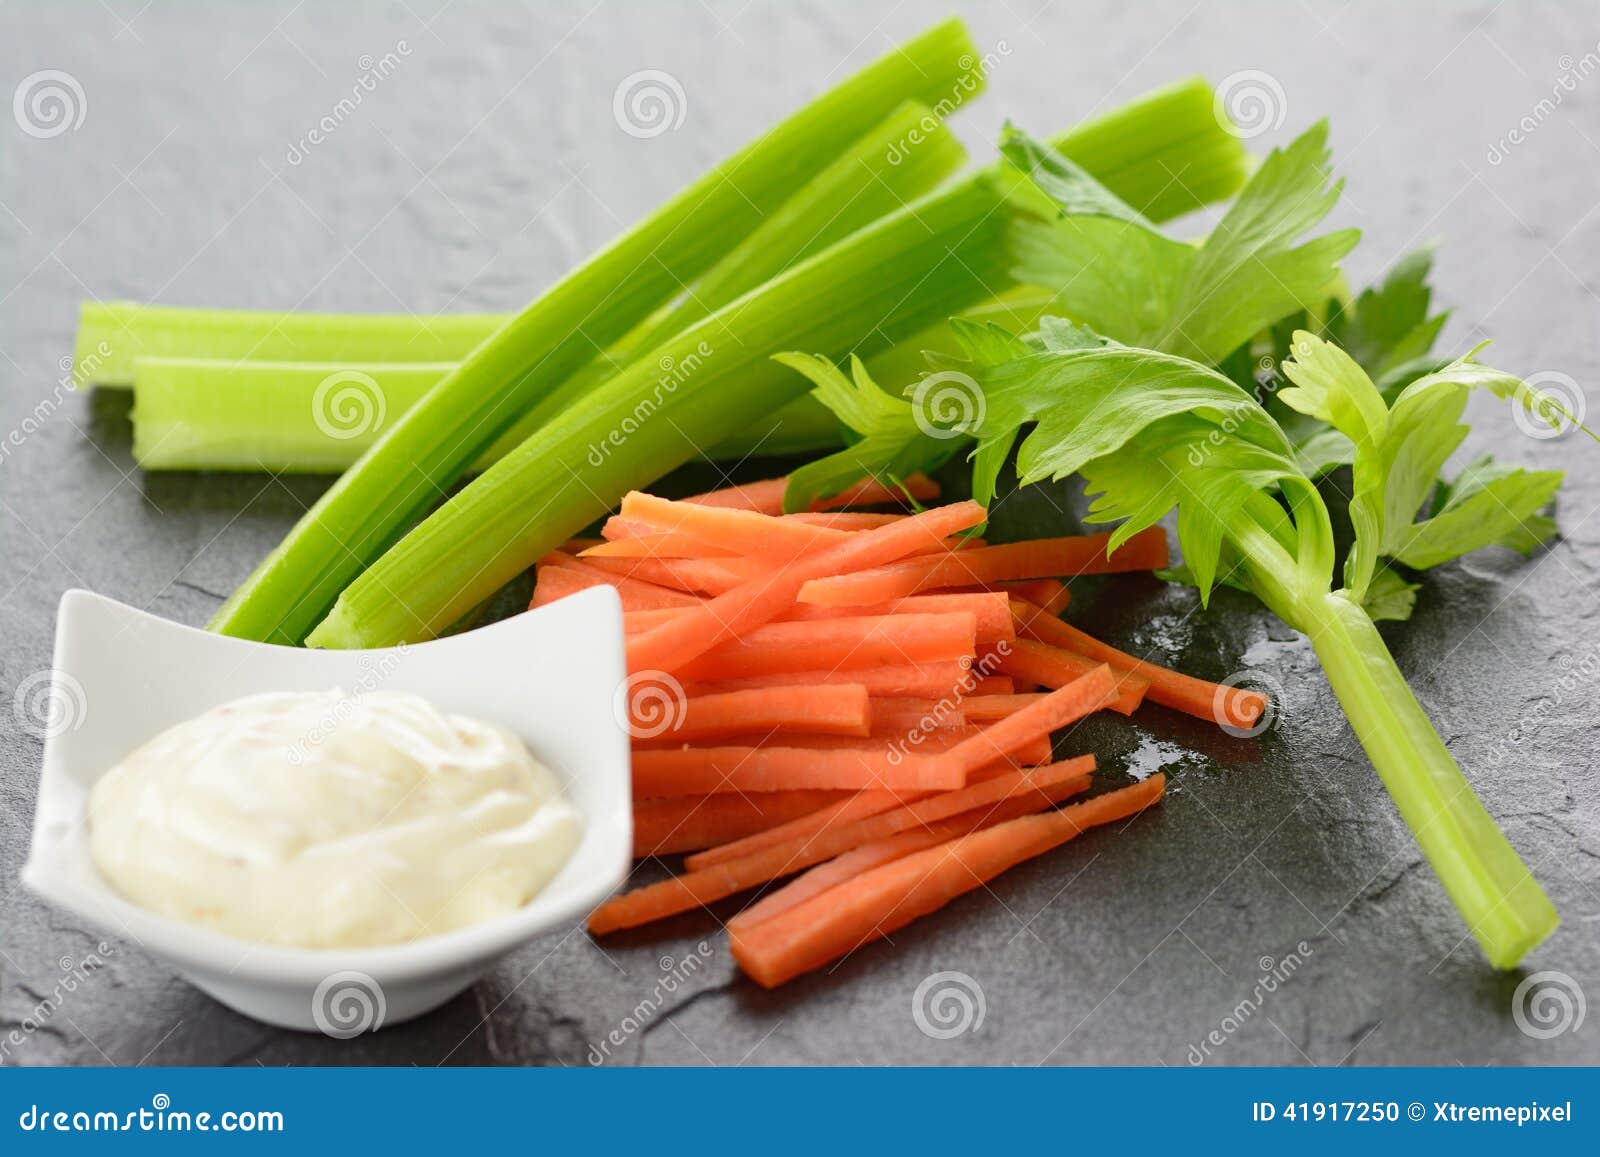 Julienne Carrots With Diced Celery Stock Photo - Image of crispy, fresh: 41917250